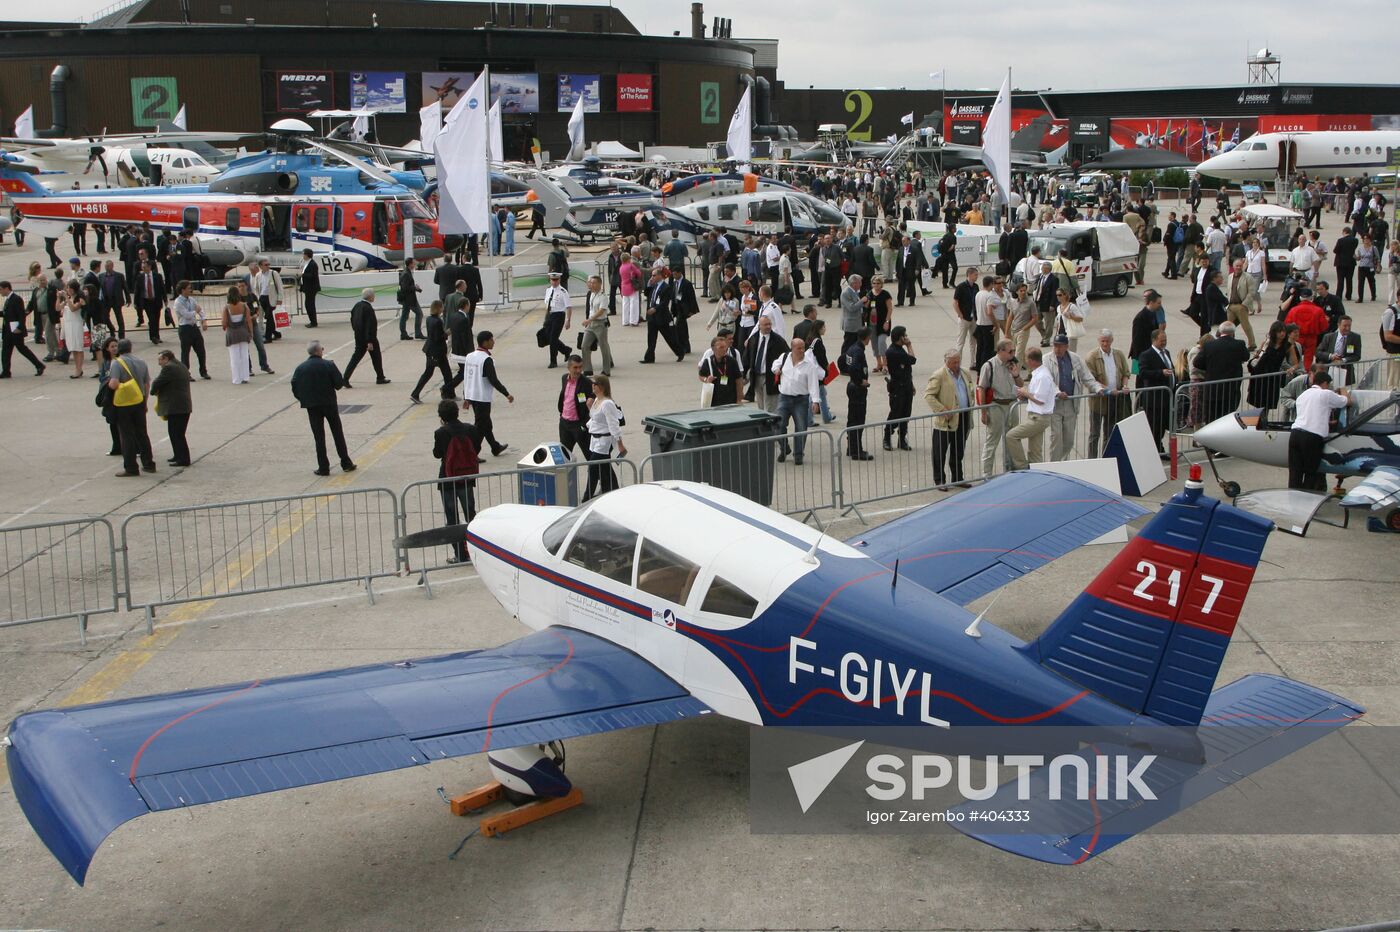 48th Paris Air Show at Le Bourget airport in France